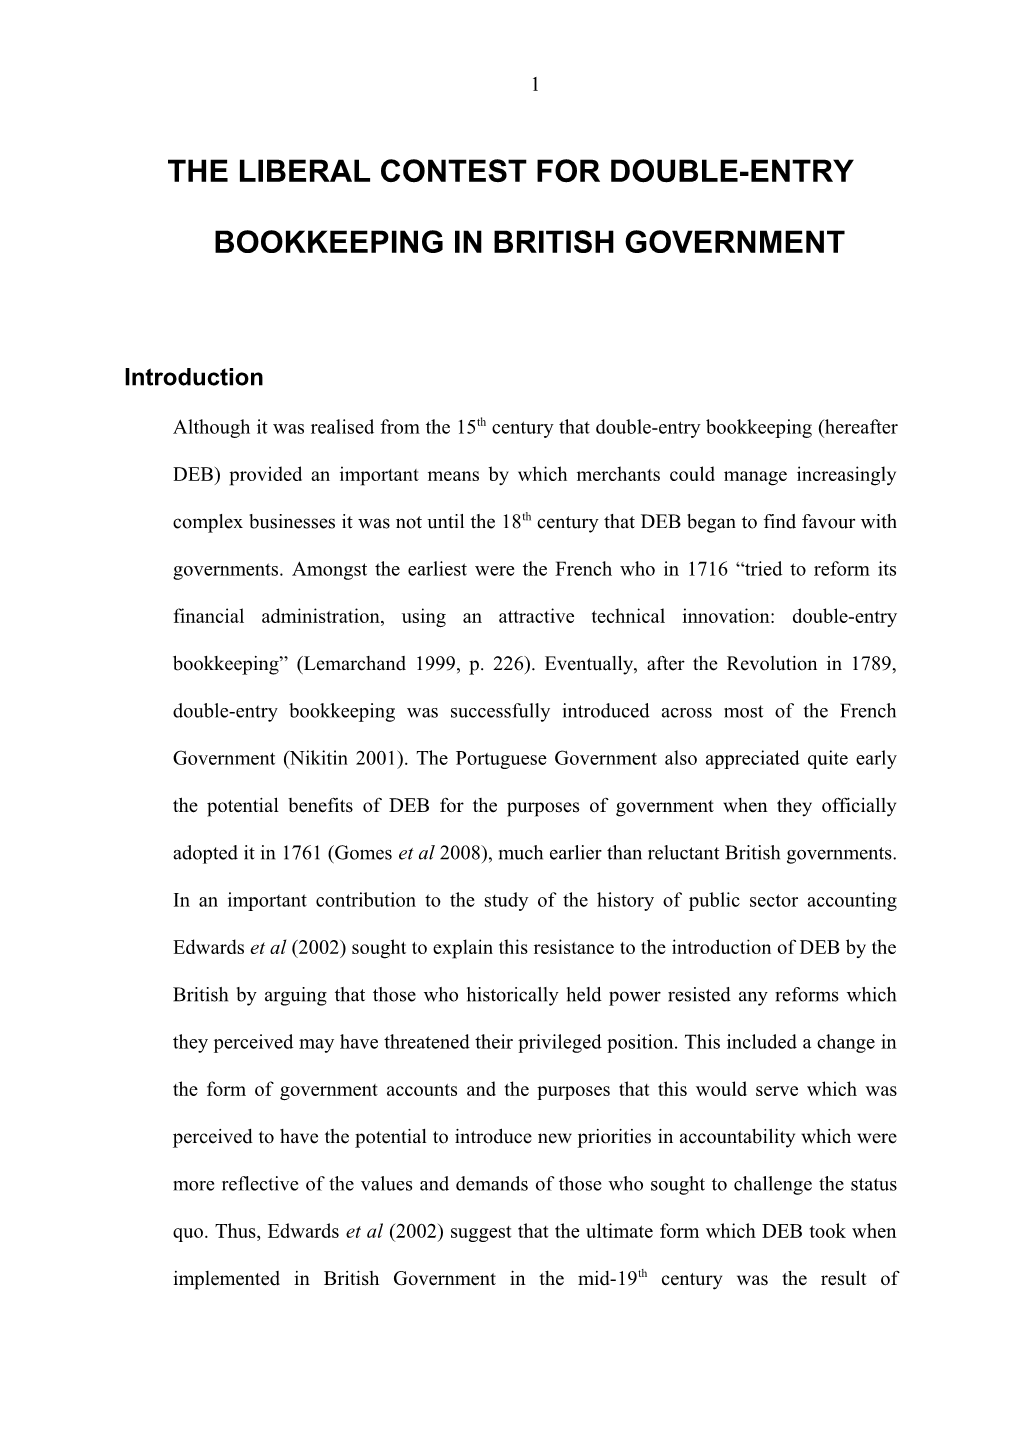 The Liberal Contest for Double-Entry Bookkeeping in British Government